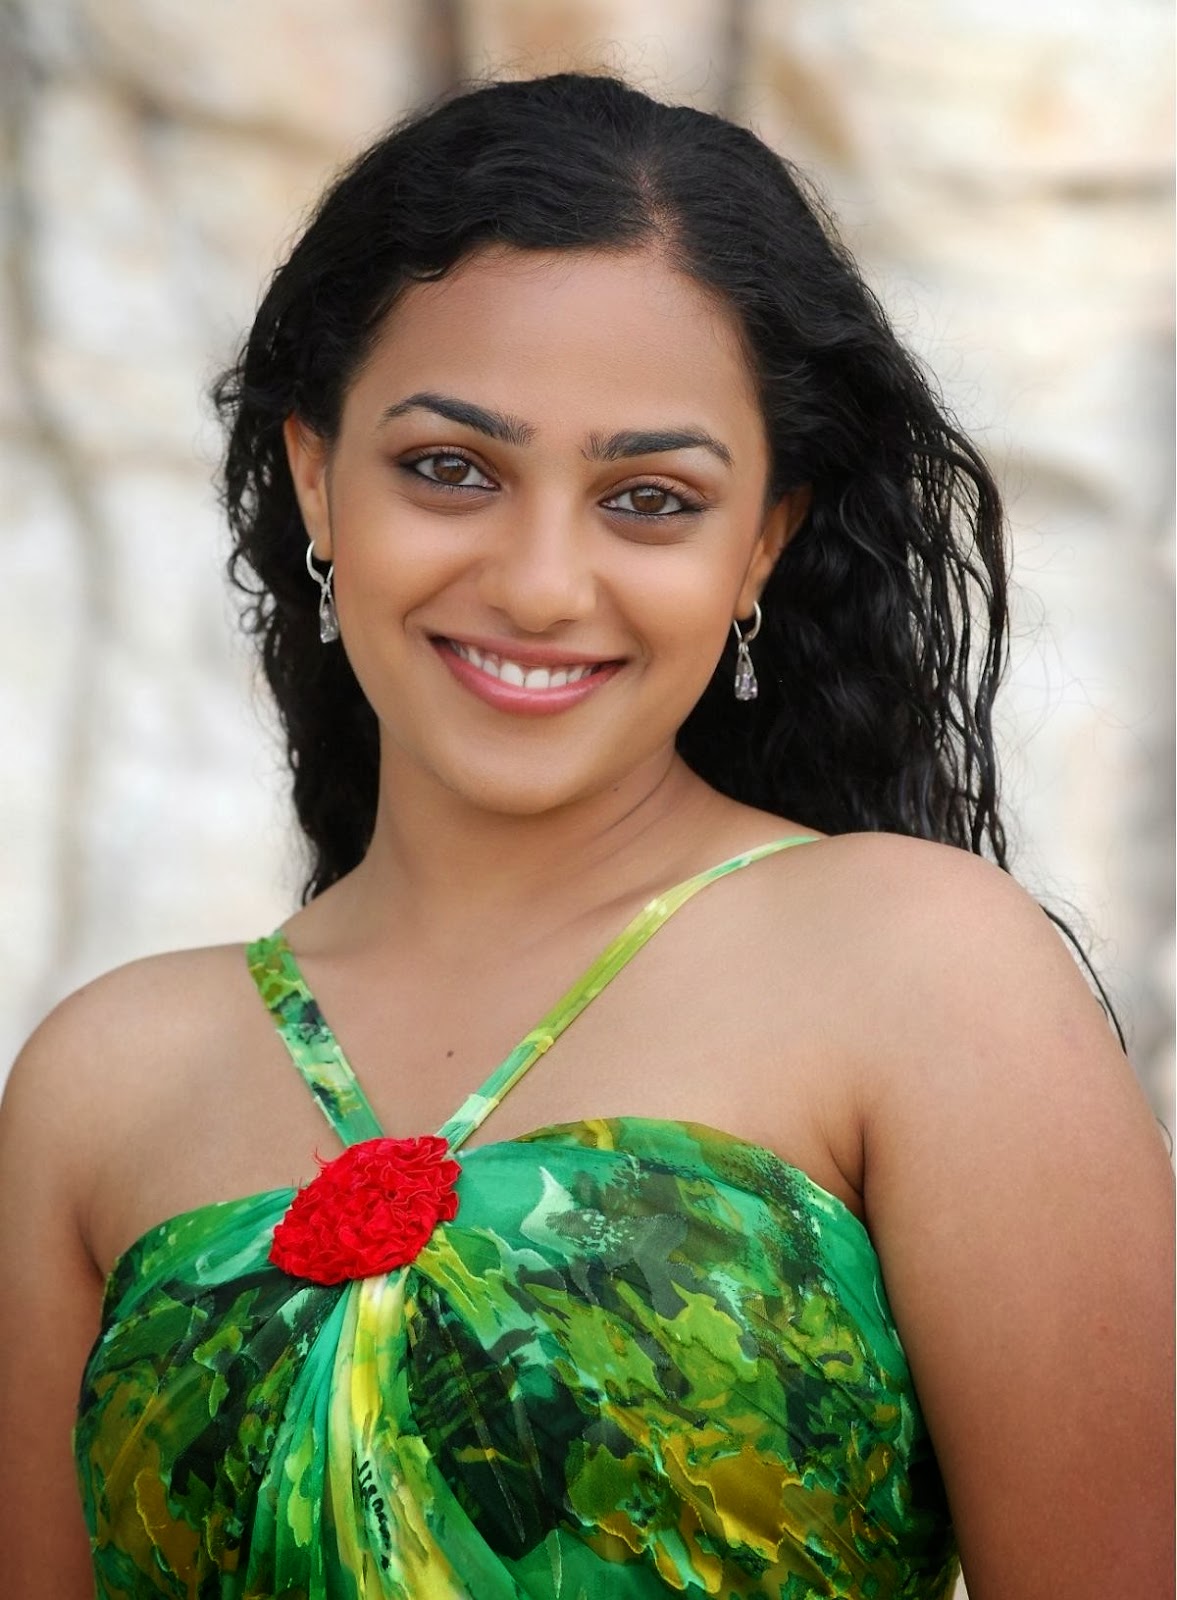 Hd Nithya Menon Sexy Videos - Health Sex Education Advices by Dr. Mandaram: actress nithya menon unseen  latest exclusive spicy stills showing bulging big boobies cleavage naked  back spicy boob shapes side view thunder thighs in short dress